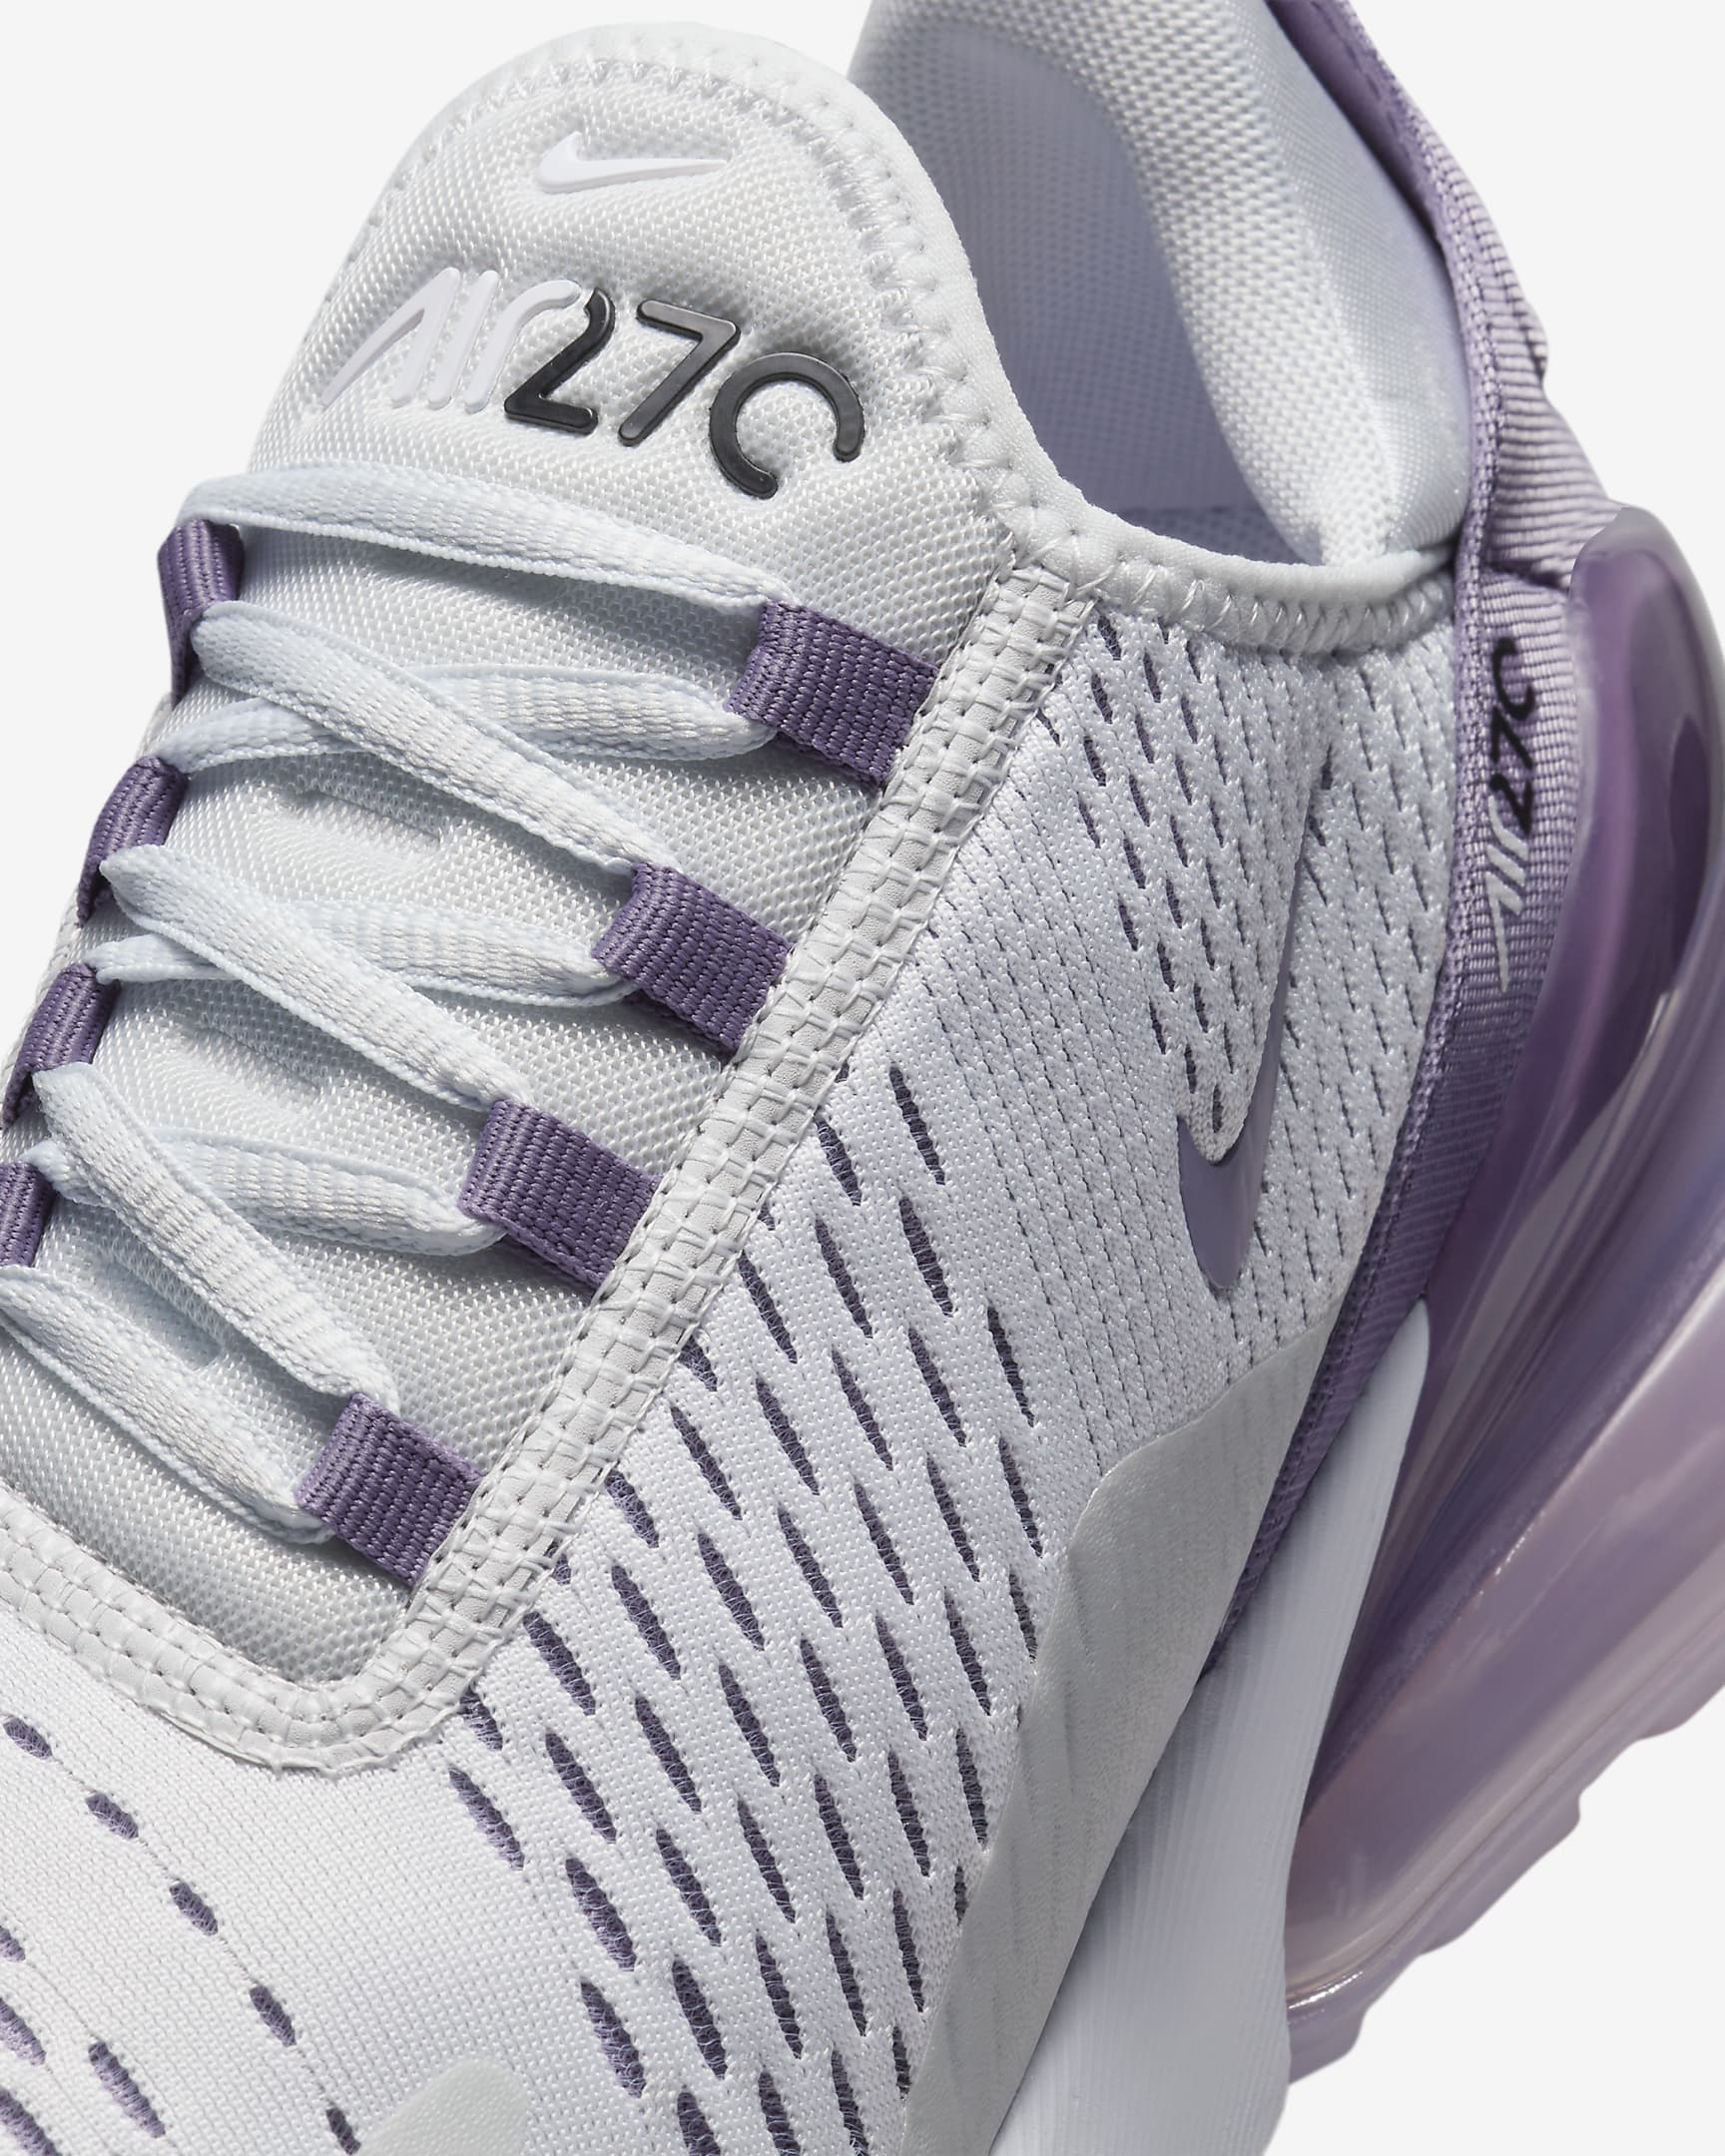 Nike Air Max 270 Women's Shoes - Pure Platinum/White/Lilac Bloom/Daybreak